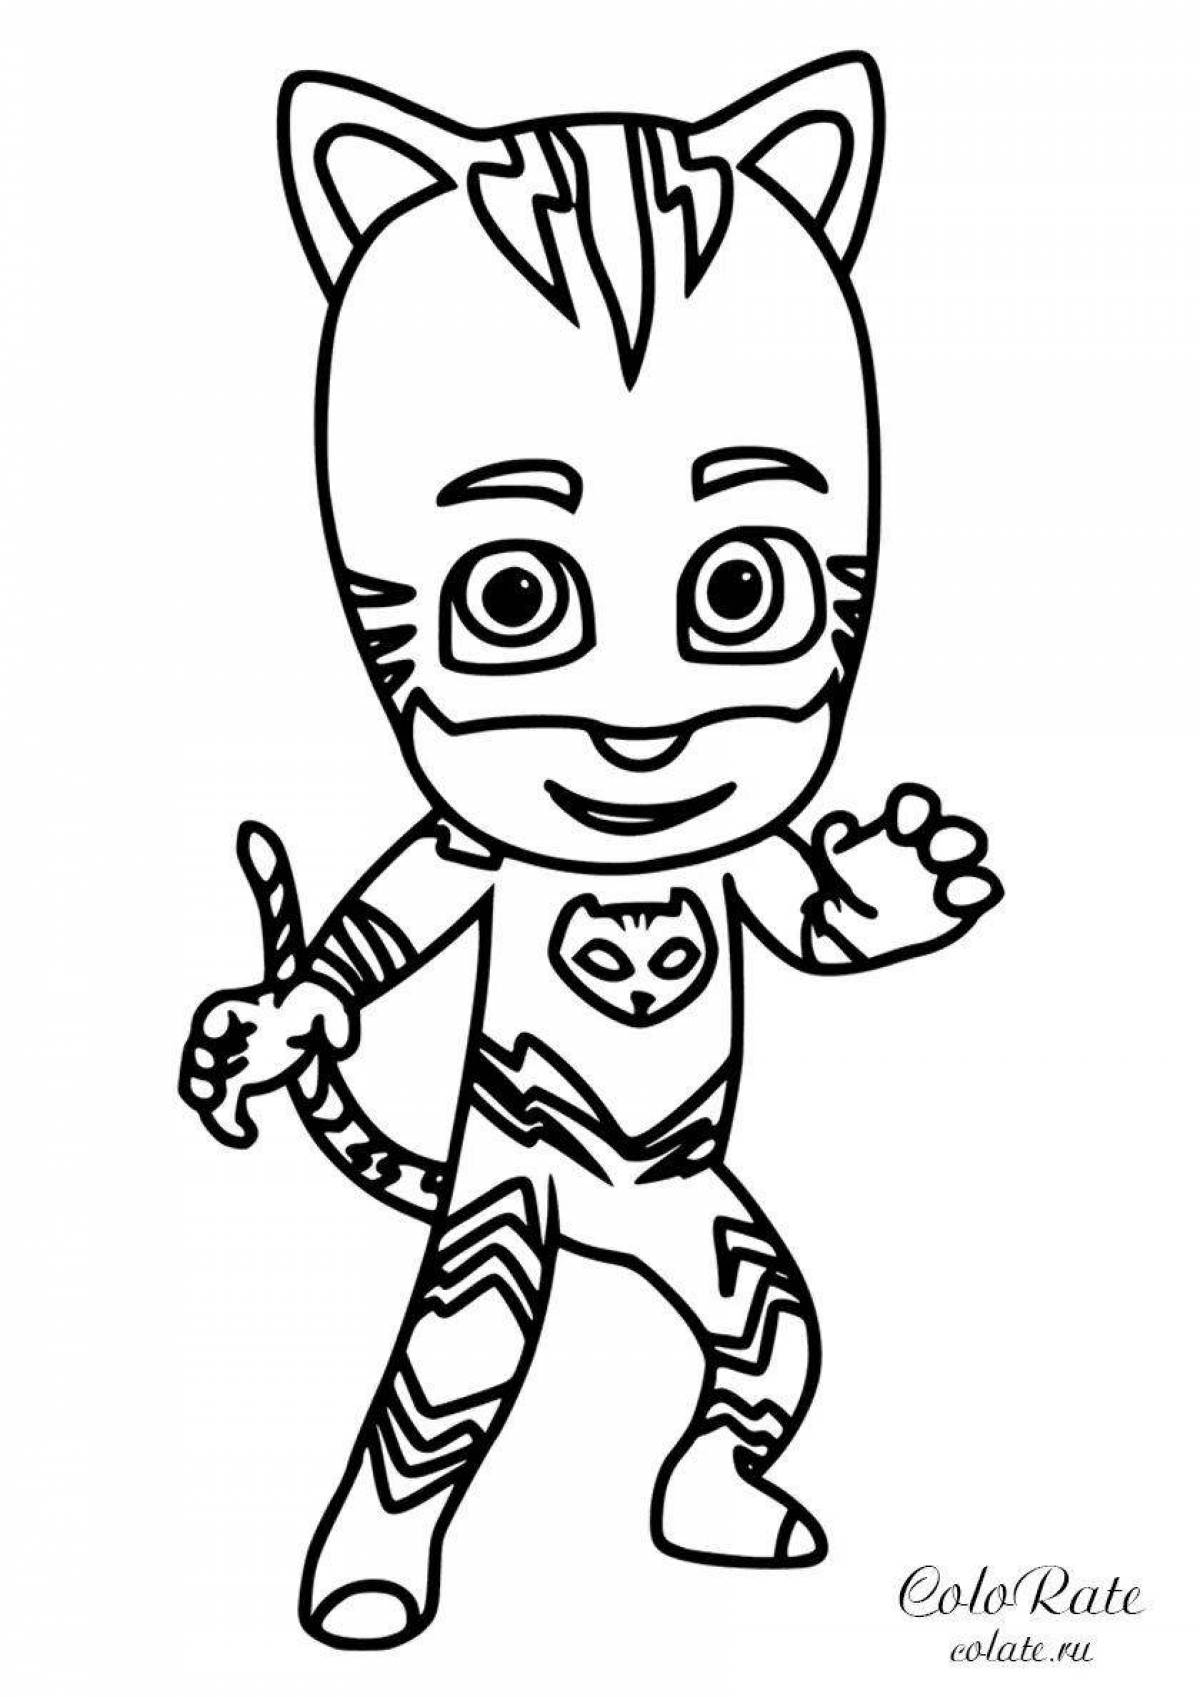 Fancy gecko coloring page